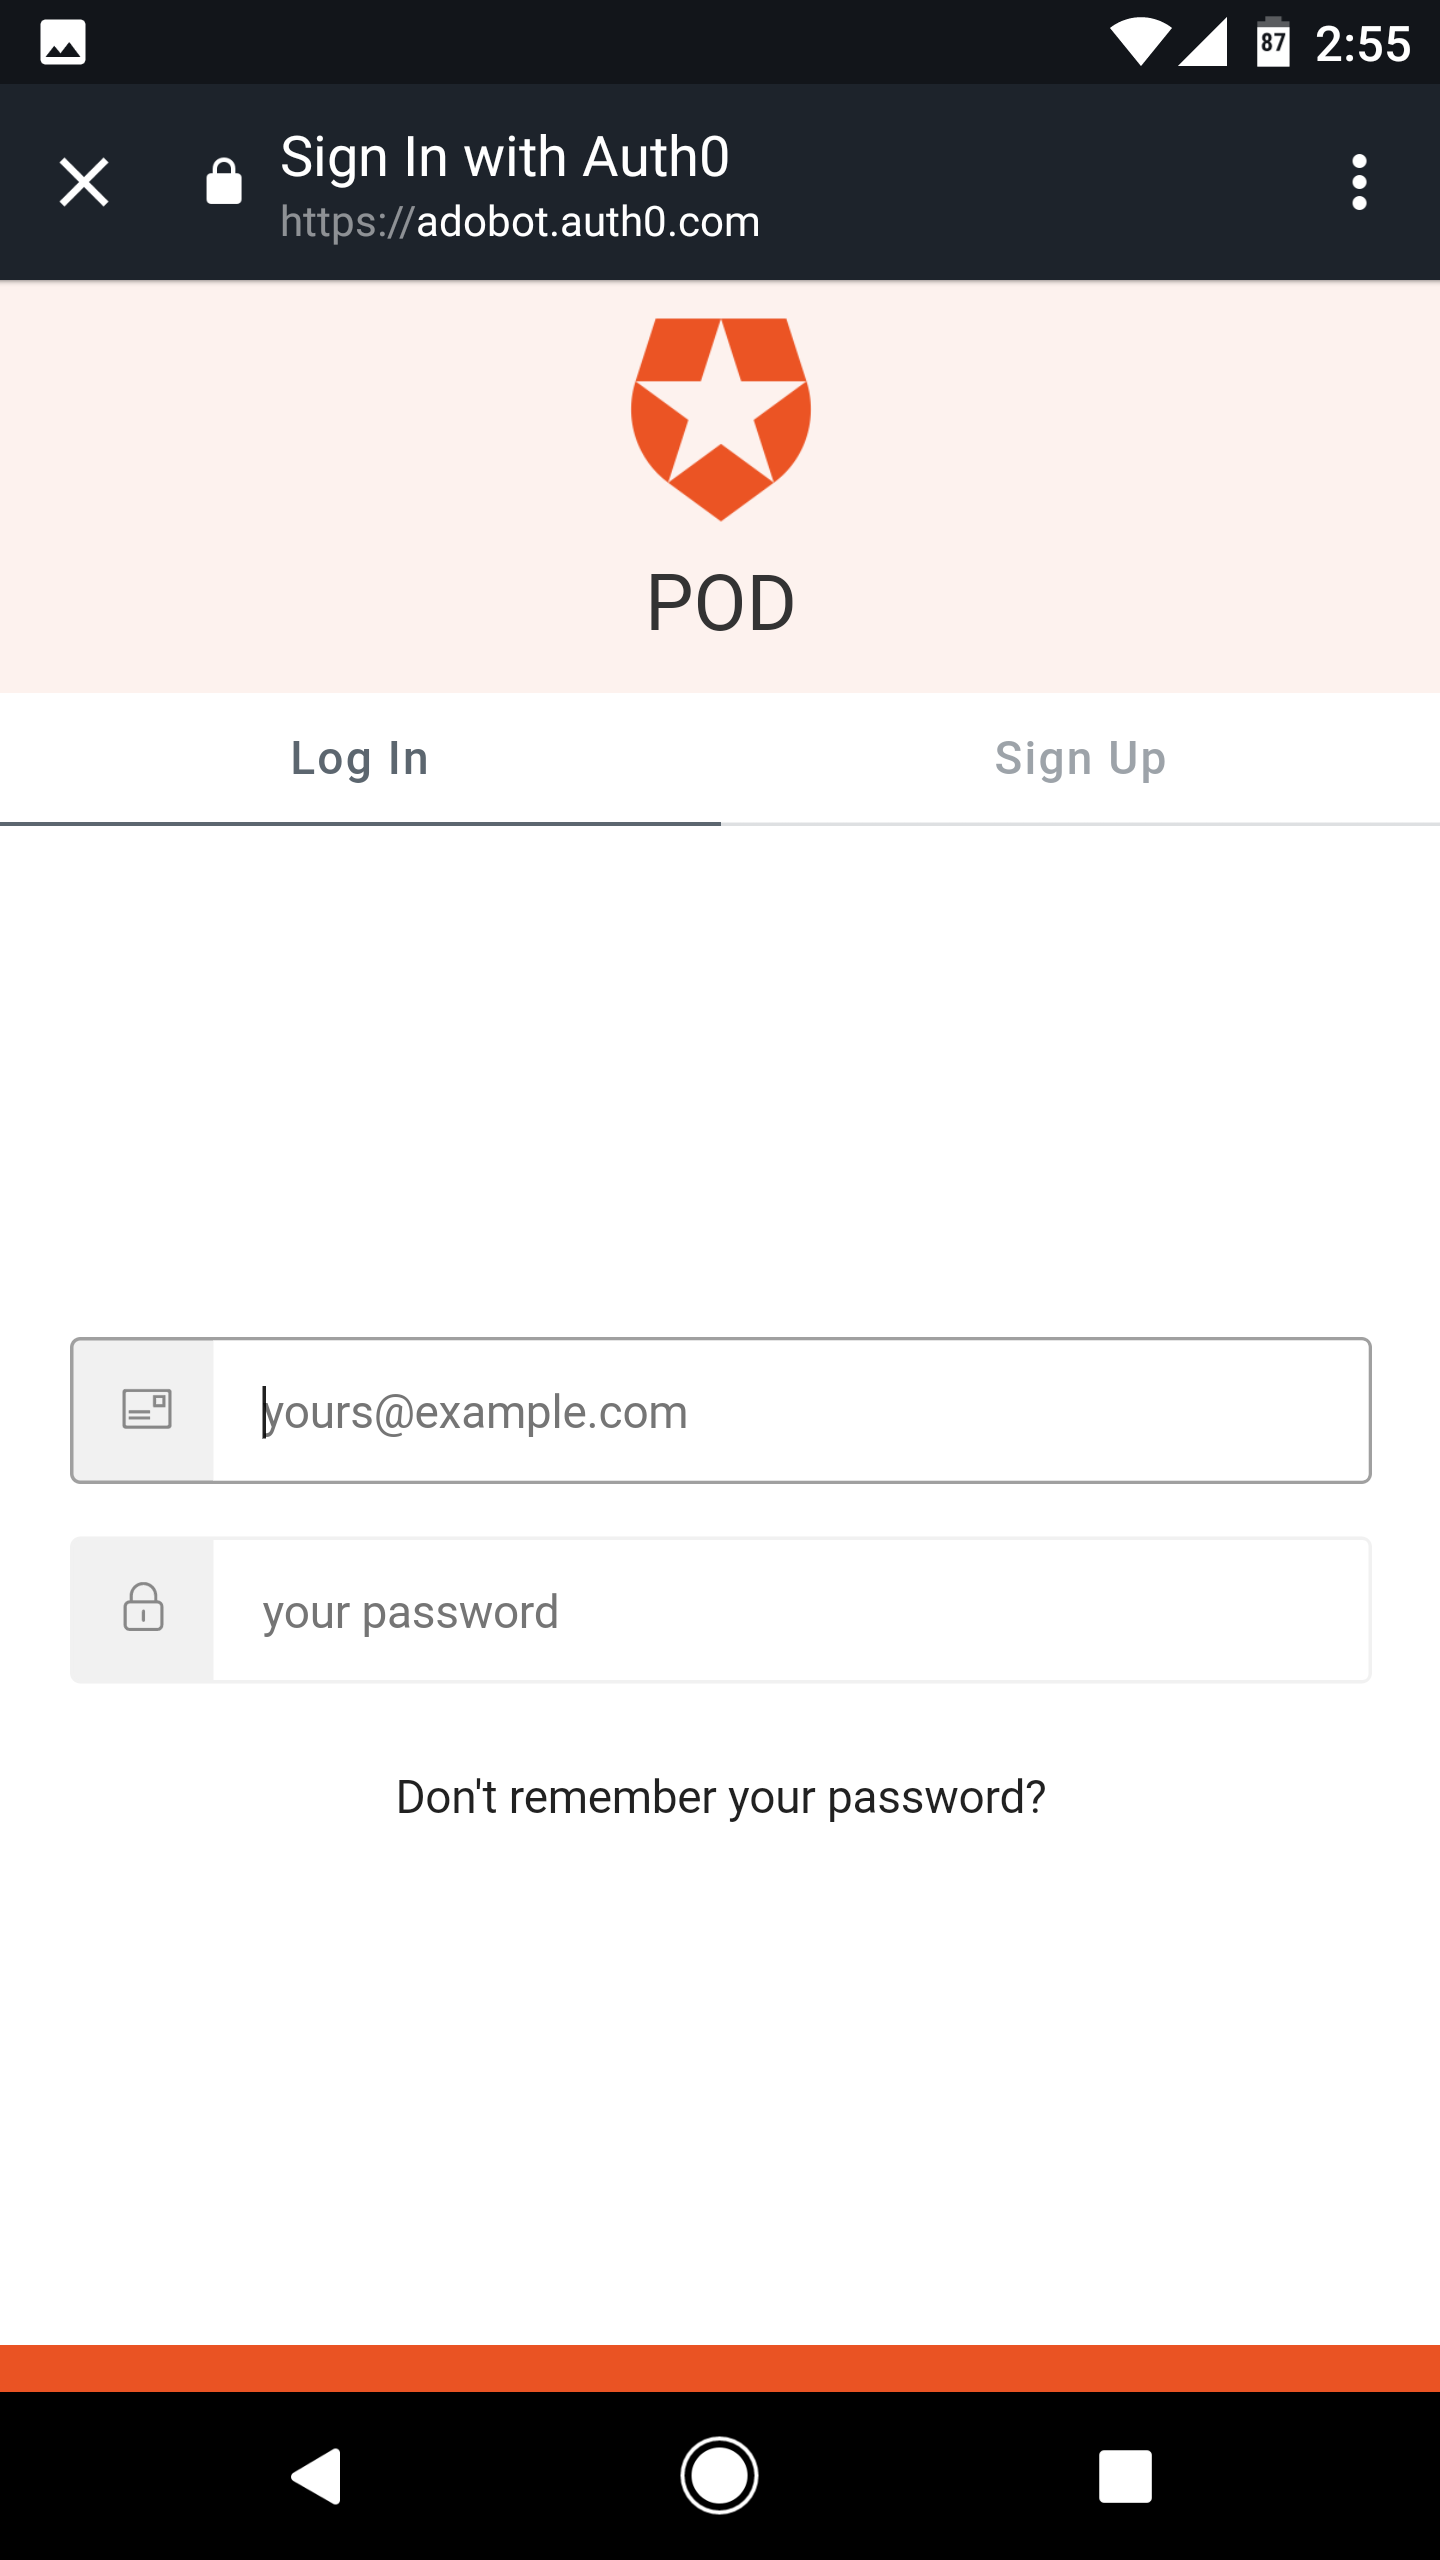 Login with Auth0